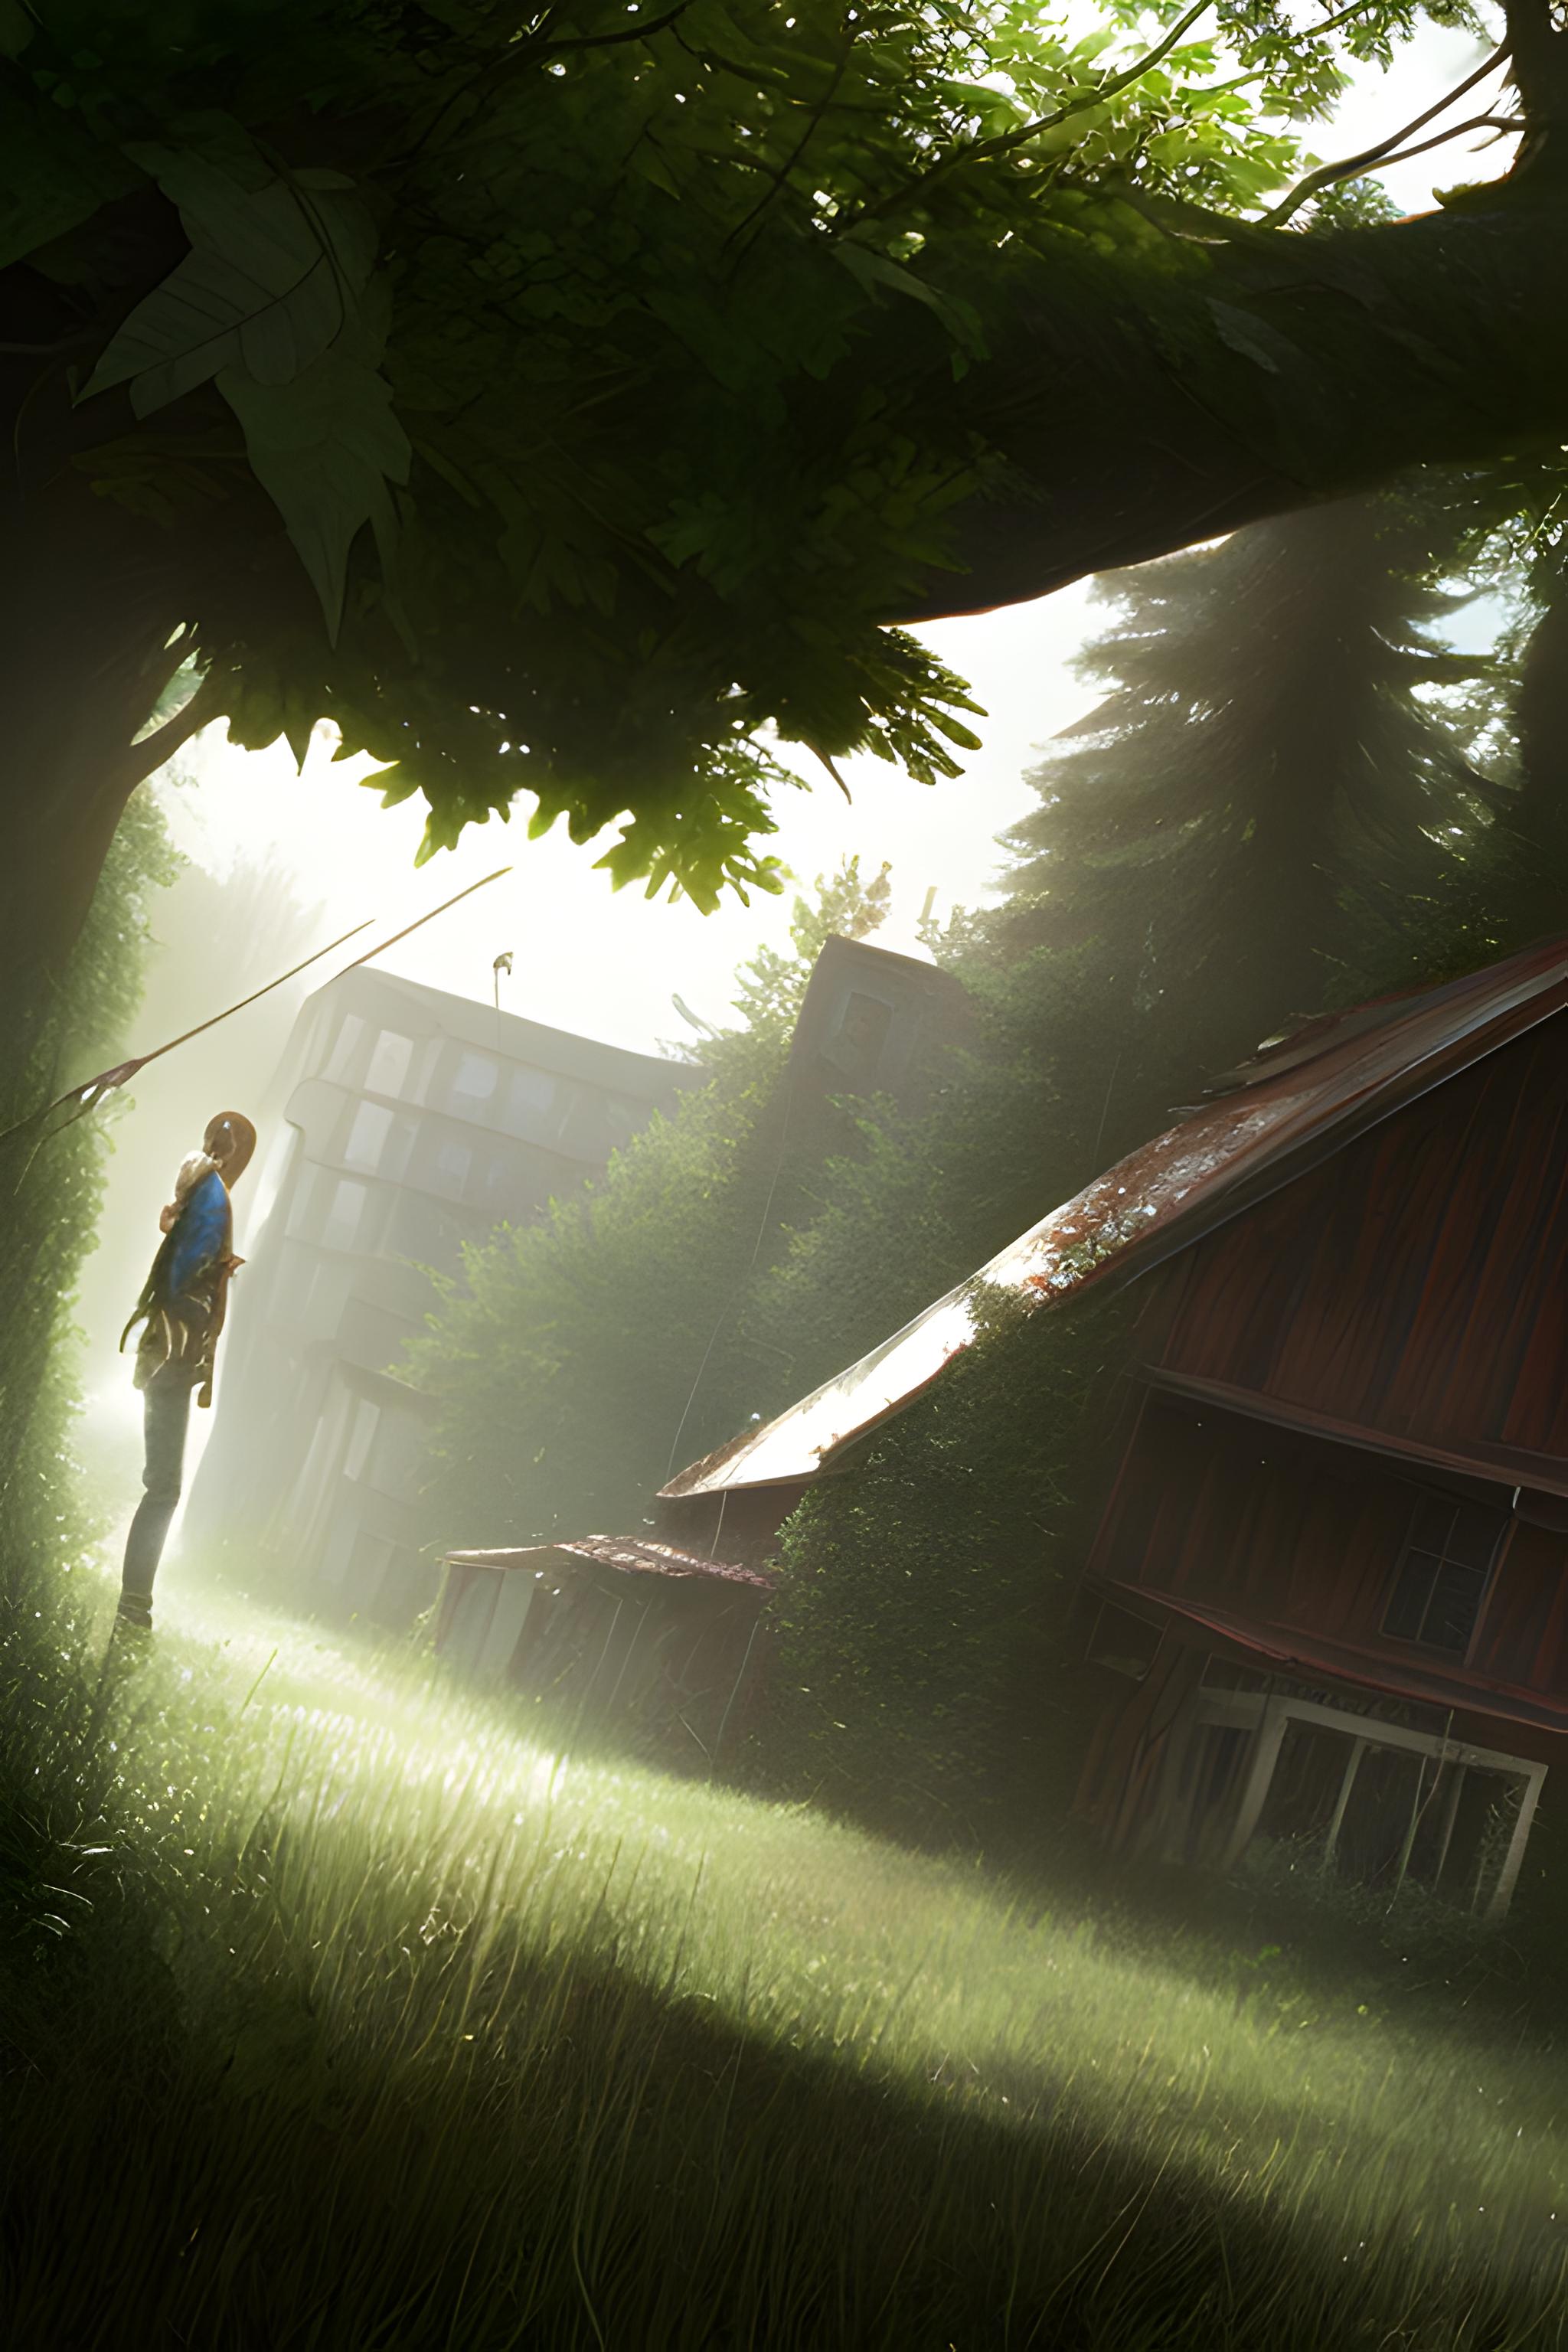 Ellie The Last Of Us 2 Wallpapers - Wallpaper Cave